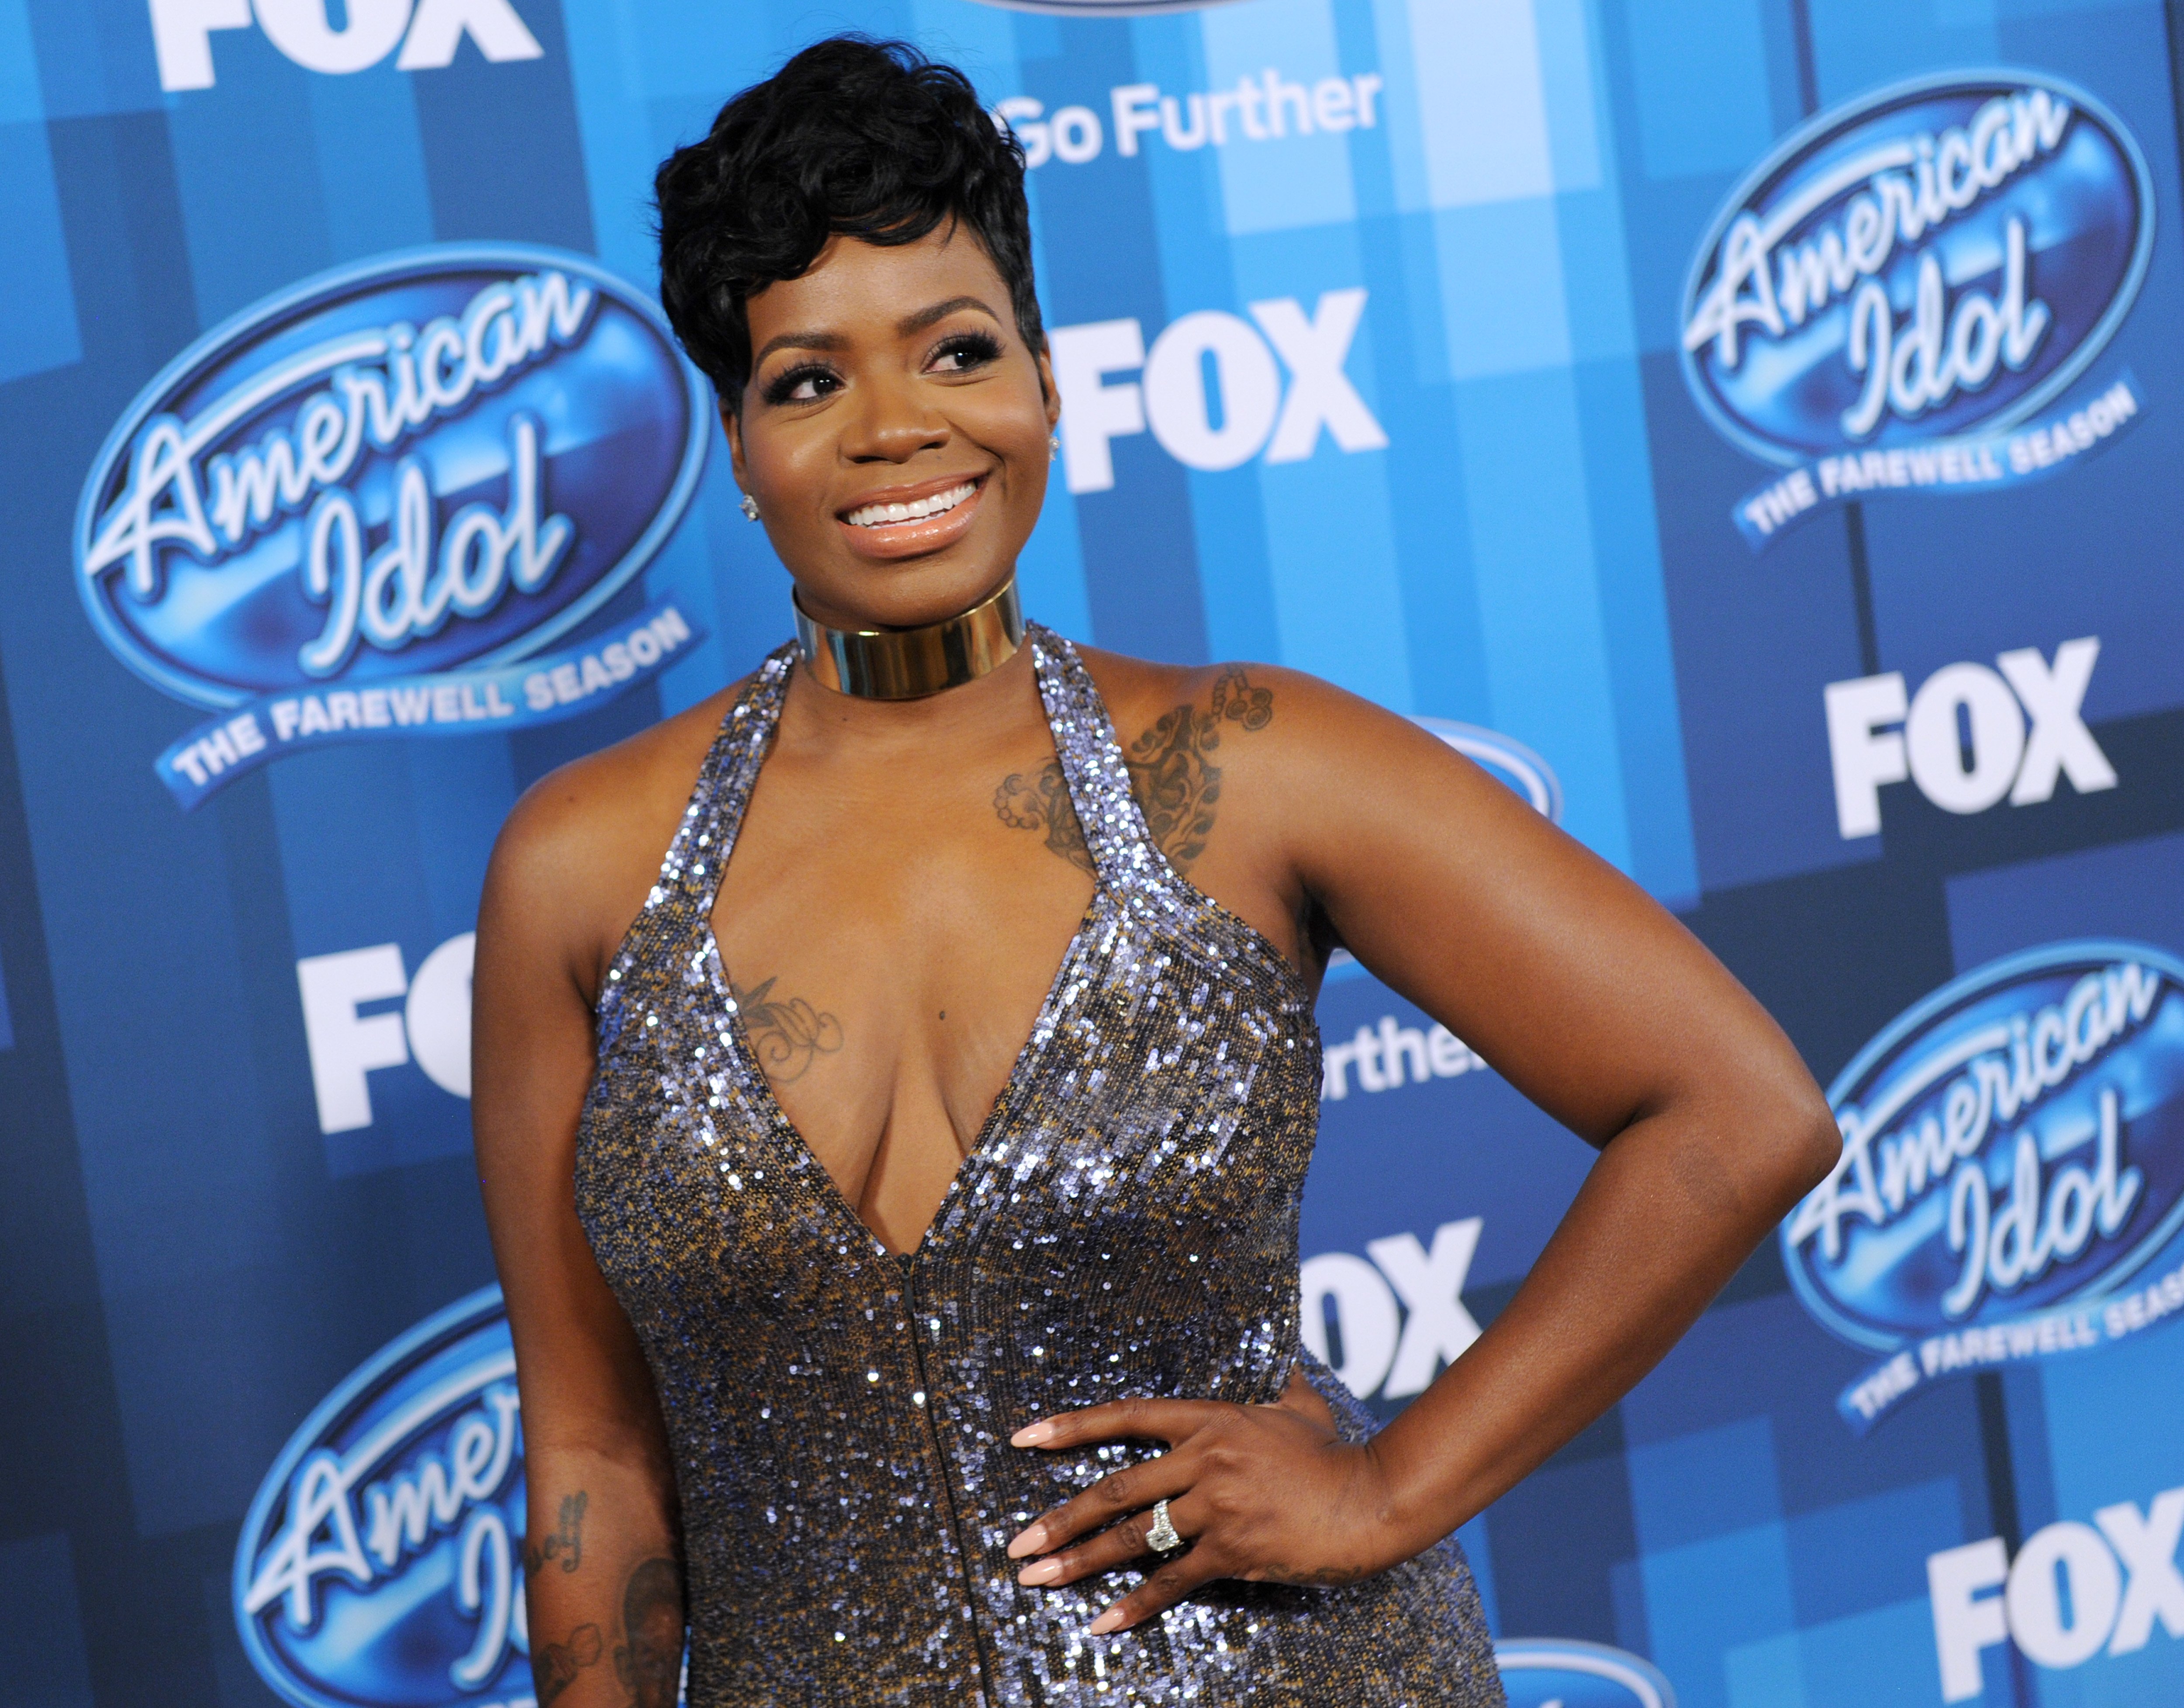  Fantasia Barrino at the finale of the farewell season of  "American Idol" at Dolby Theatre on April 7, 2016 in Hollywood, California.| Source: Getty Images